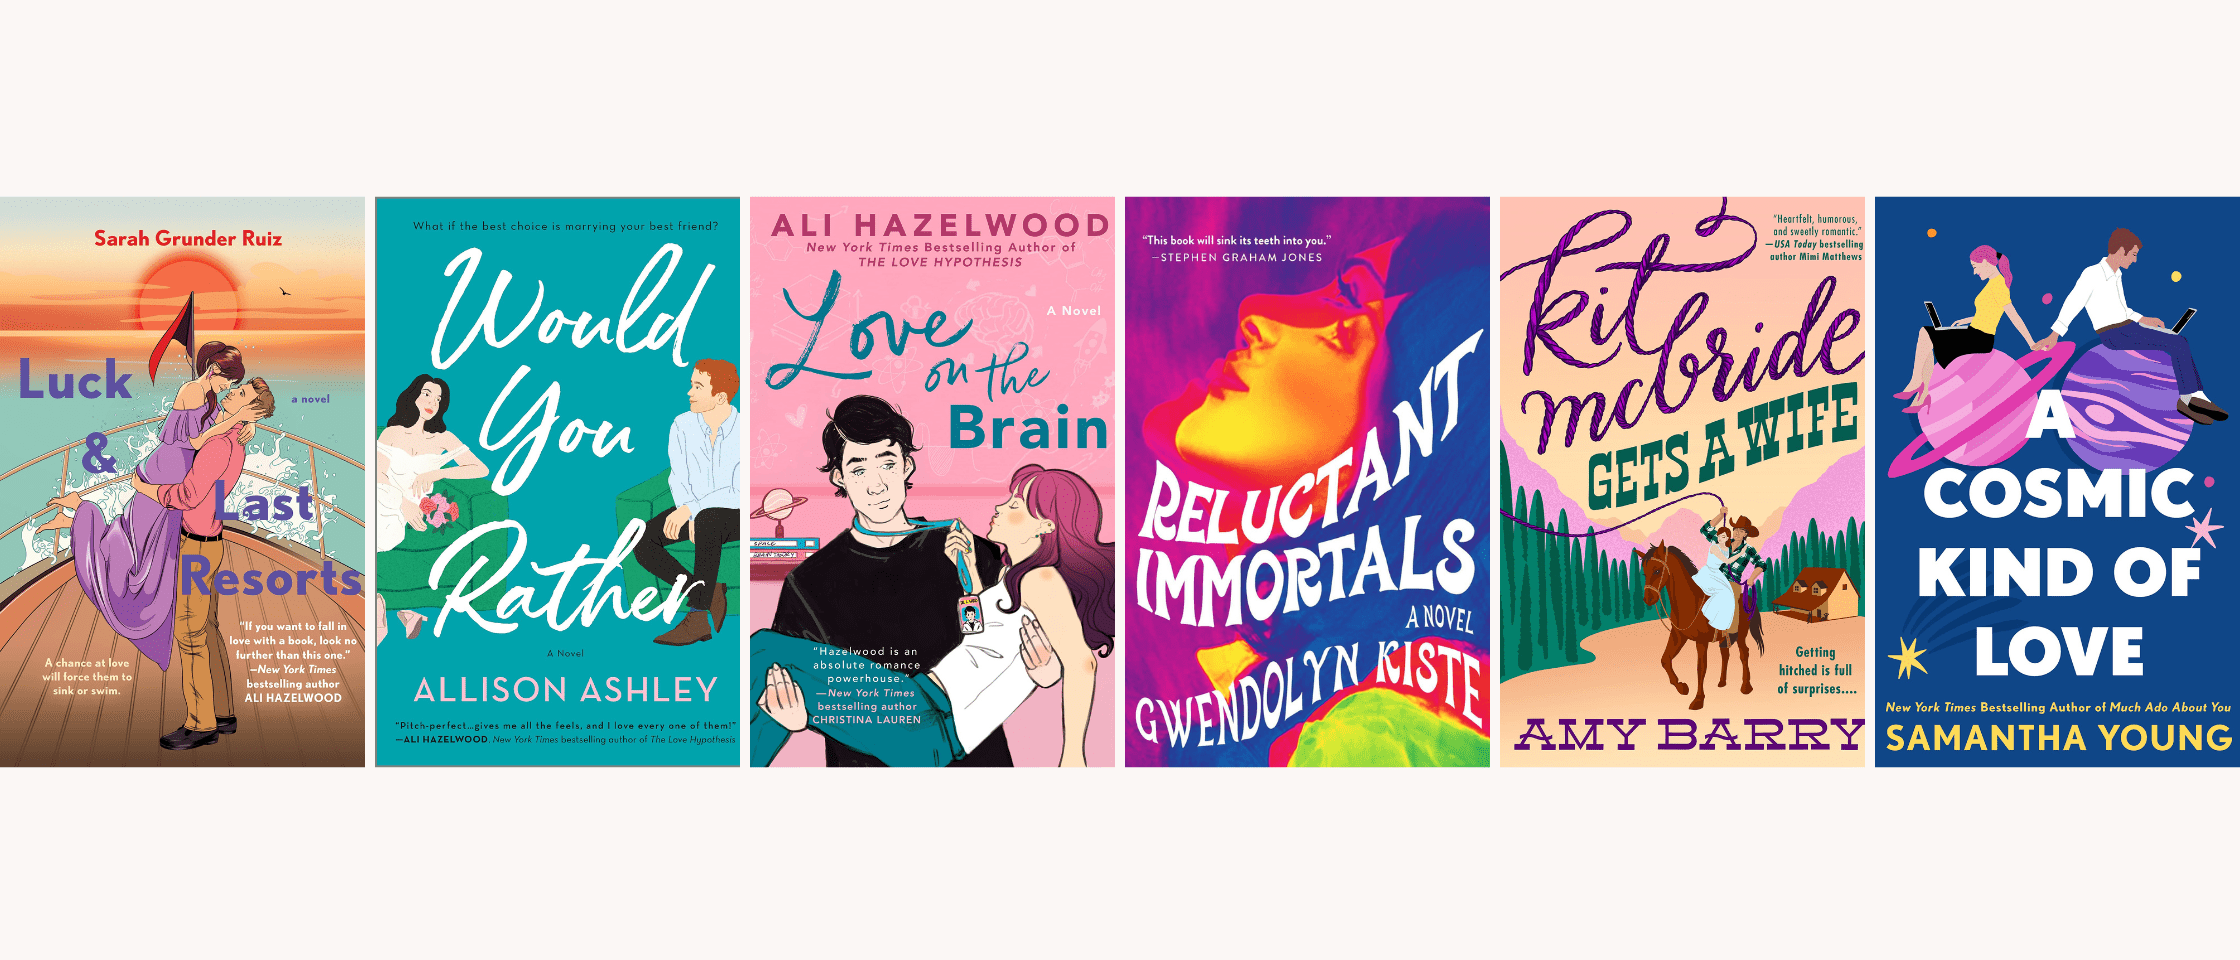 Summer Reading Guide: Romance